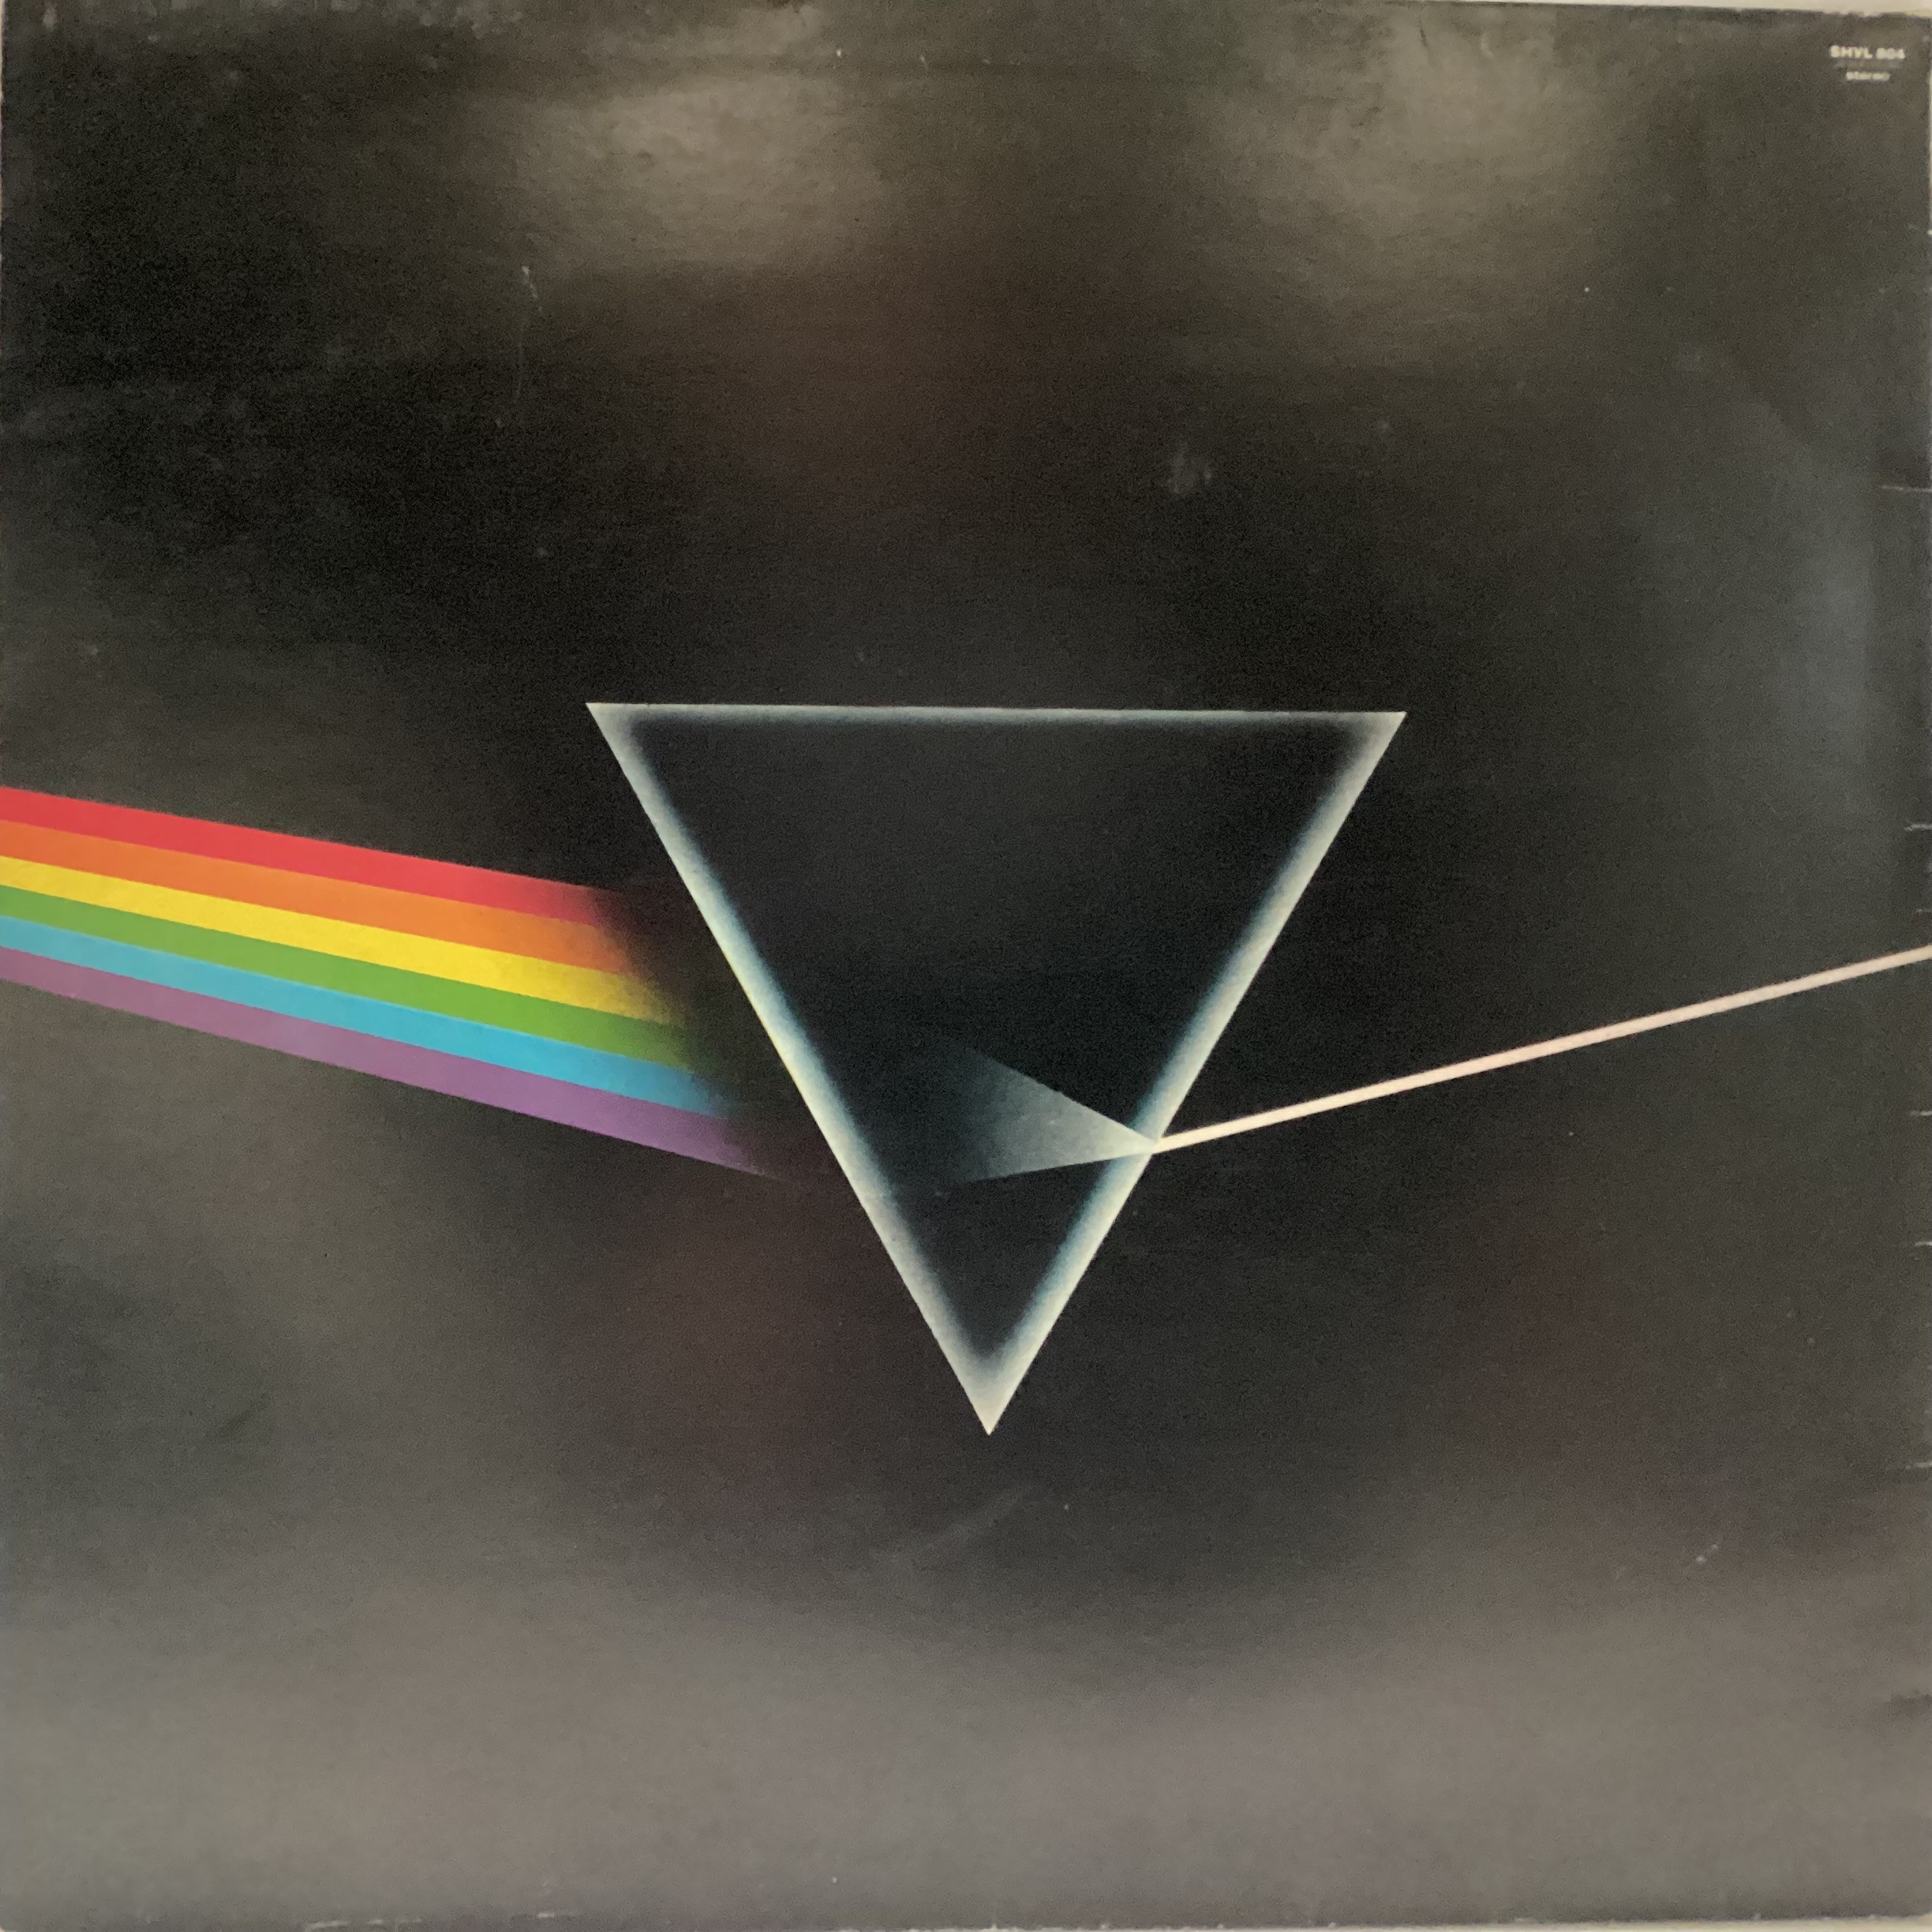 PINK FLOYD ‘DARK SIDE OF THE MOON’ VINYL LP RECORD. Found here on Harvest Records SHVL 804 from - Image 2 of 5